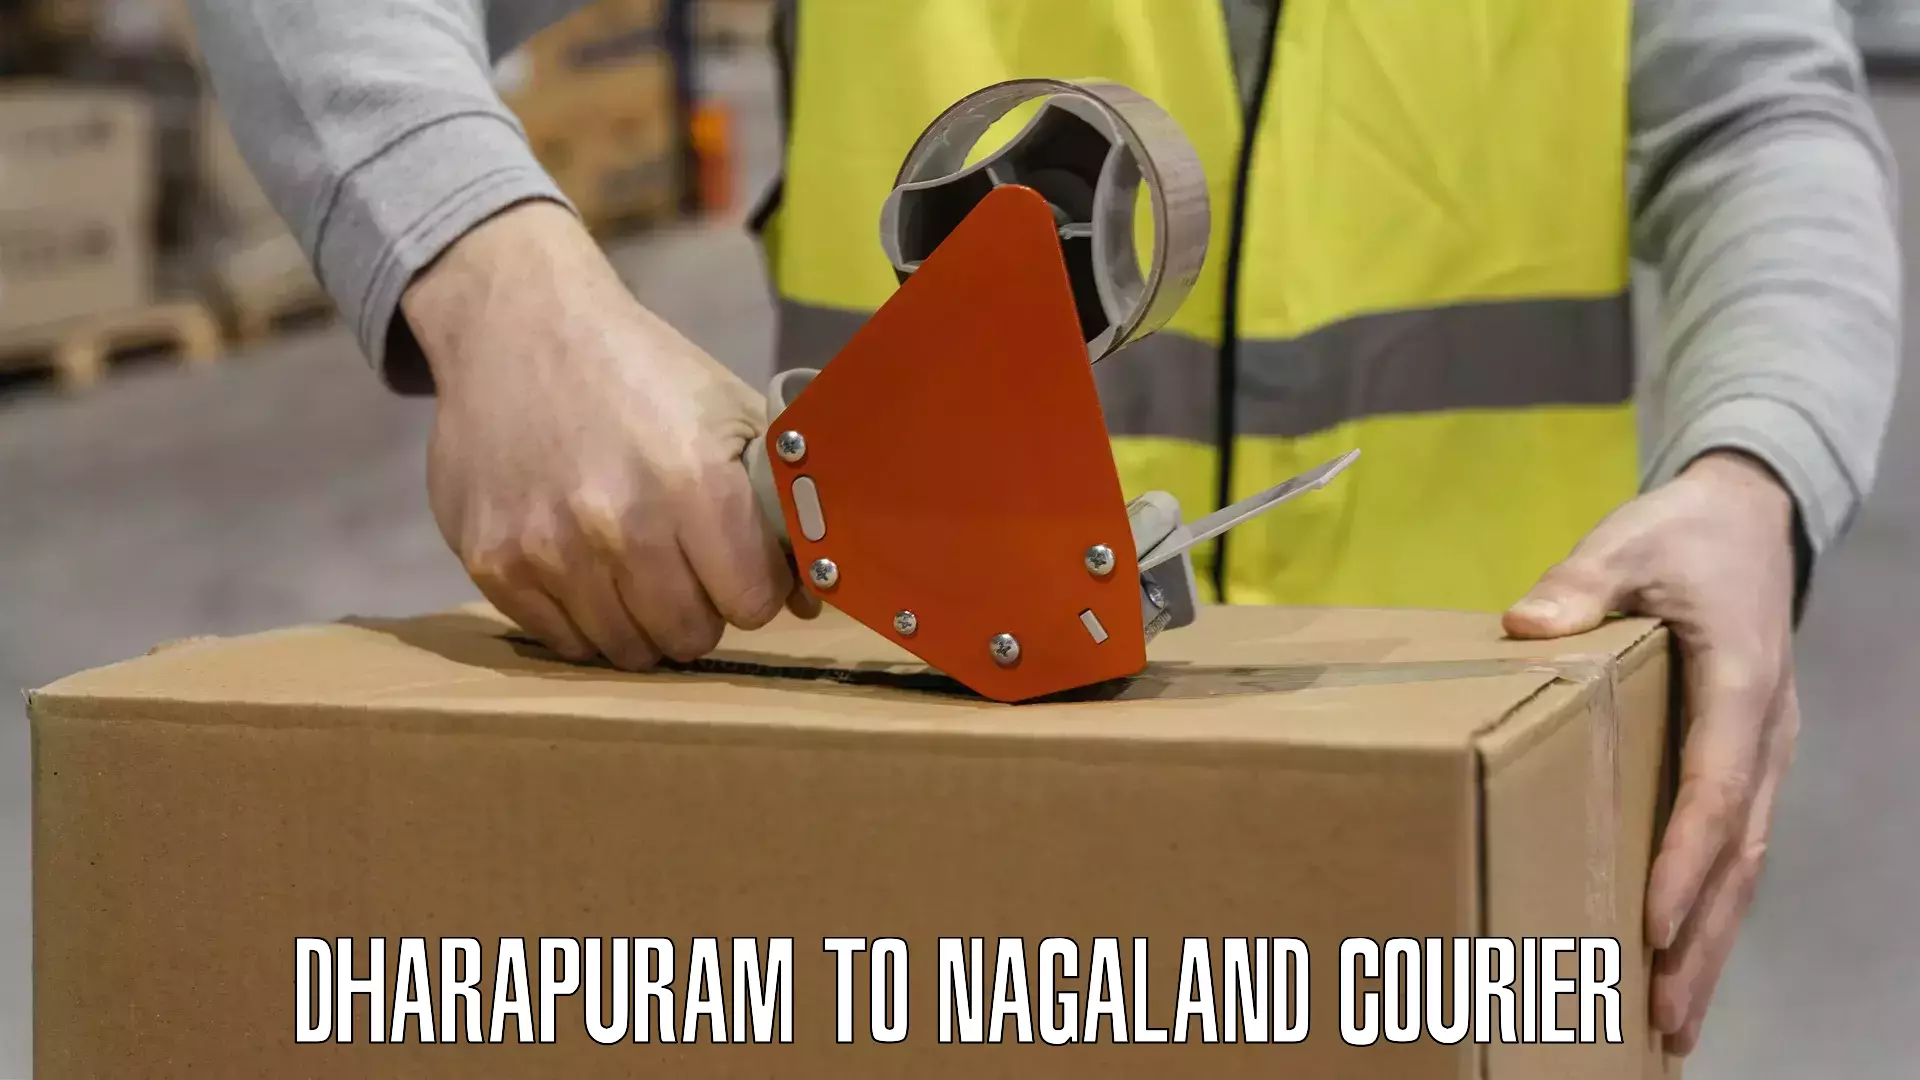 User-friendly delivery service Dharapuram to Nagaland